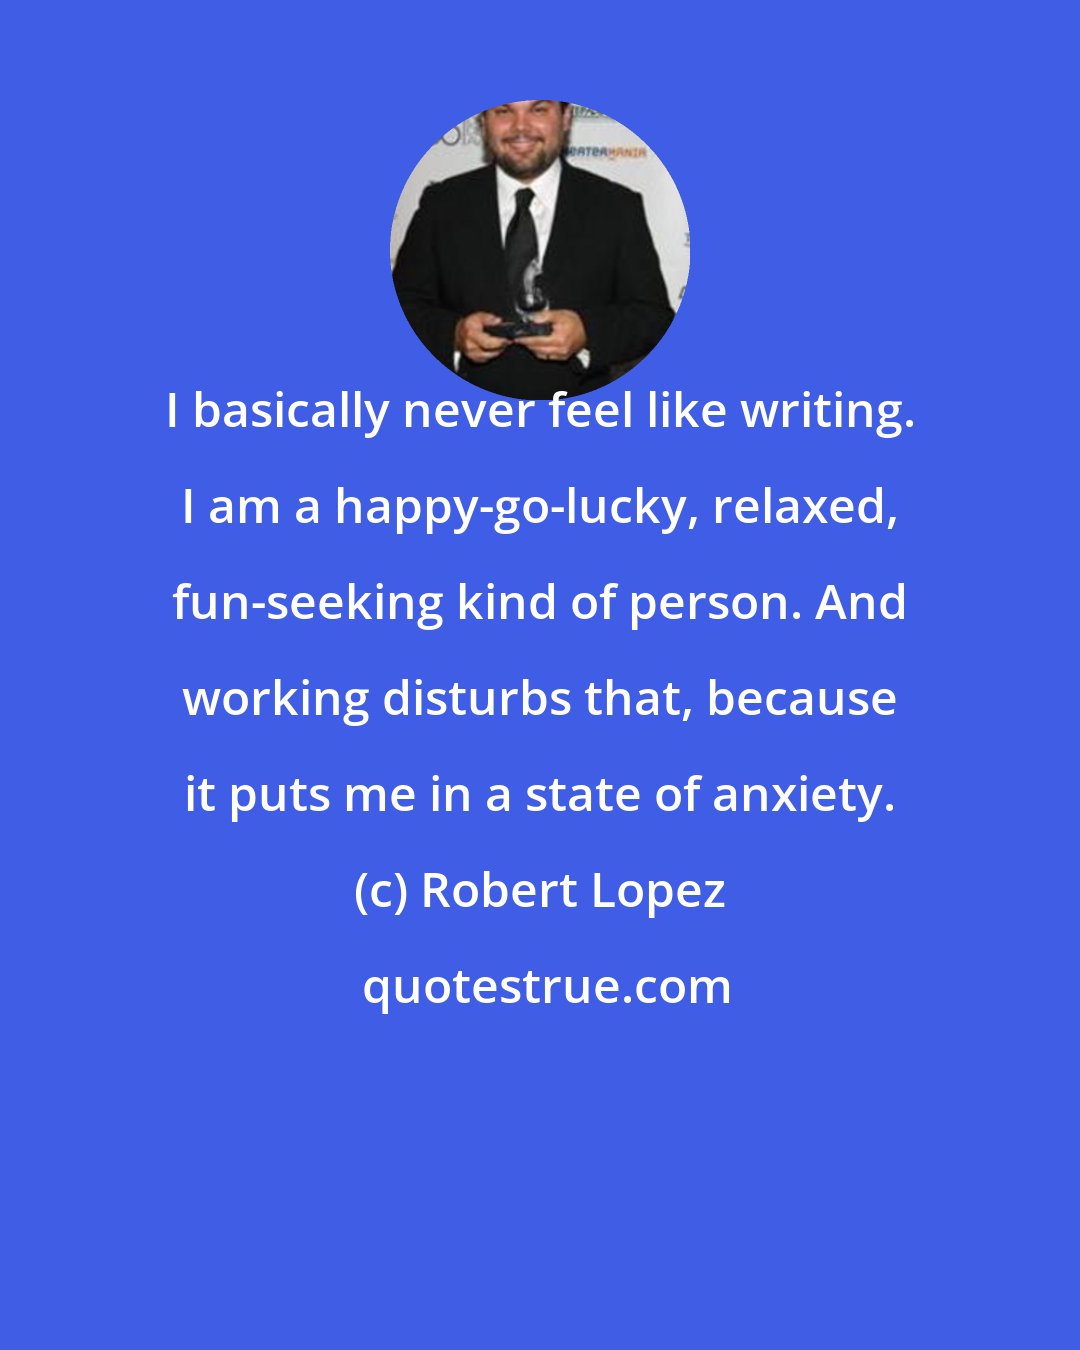 Robert Lopez: I basically never feel like writing. I am a happy-go-lucky, relaxed, fun-seeking kind of person. And working disturbs that, because it puts me in a state of anxiety.